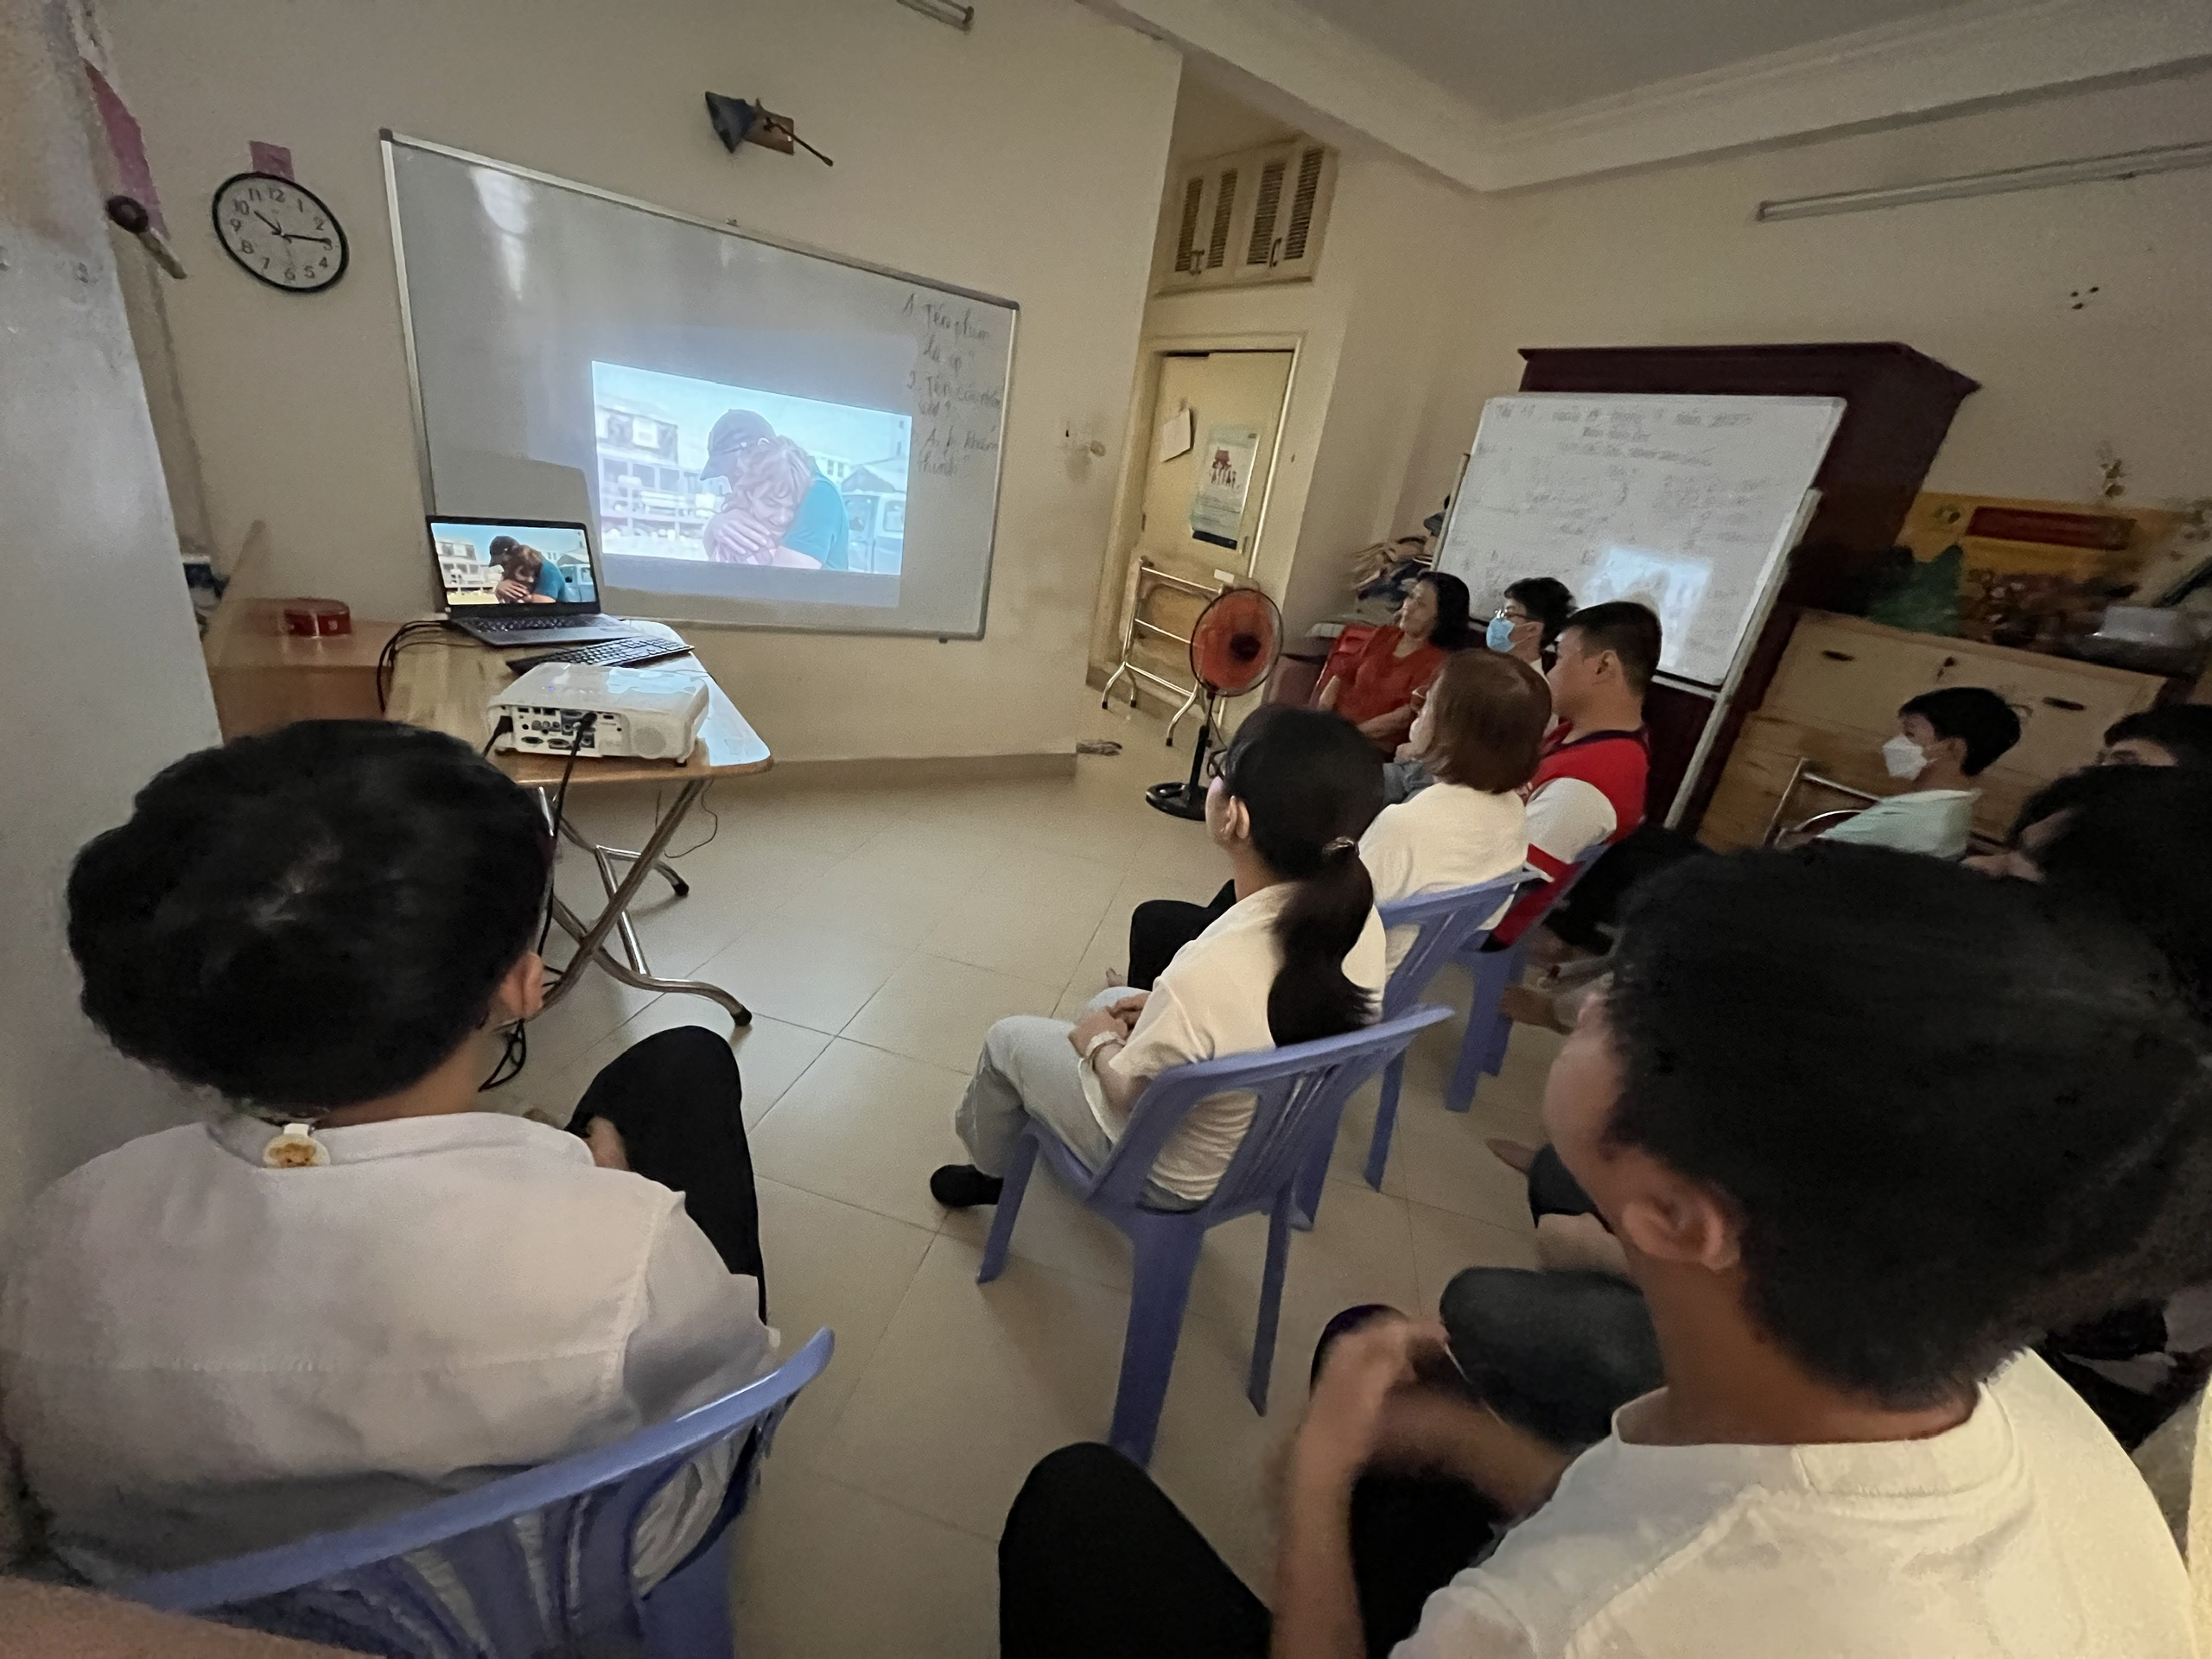 EXTRACURRICULAR SESSION – WATCHING MOVIE “CODA – CHILD OF DEAF ADULTS”